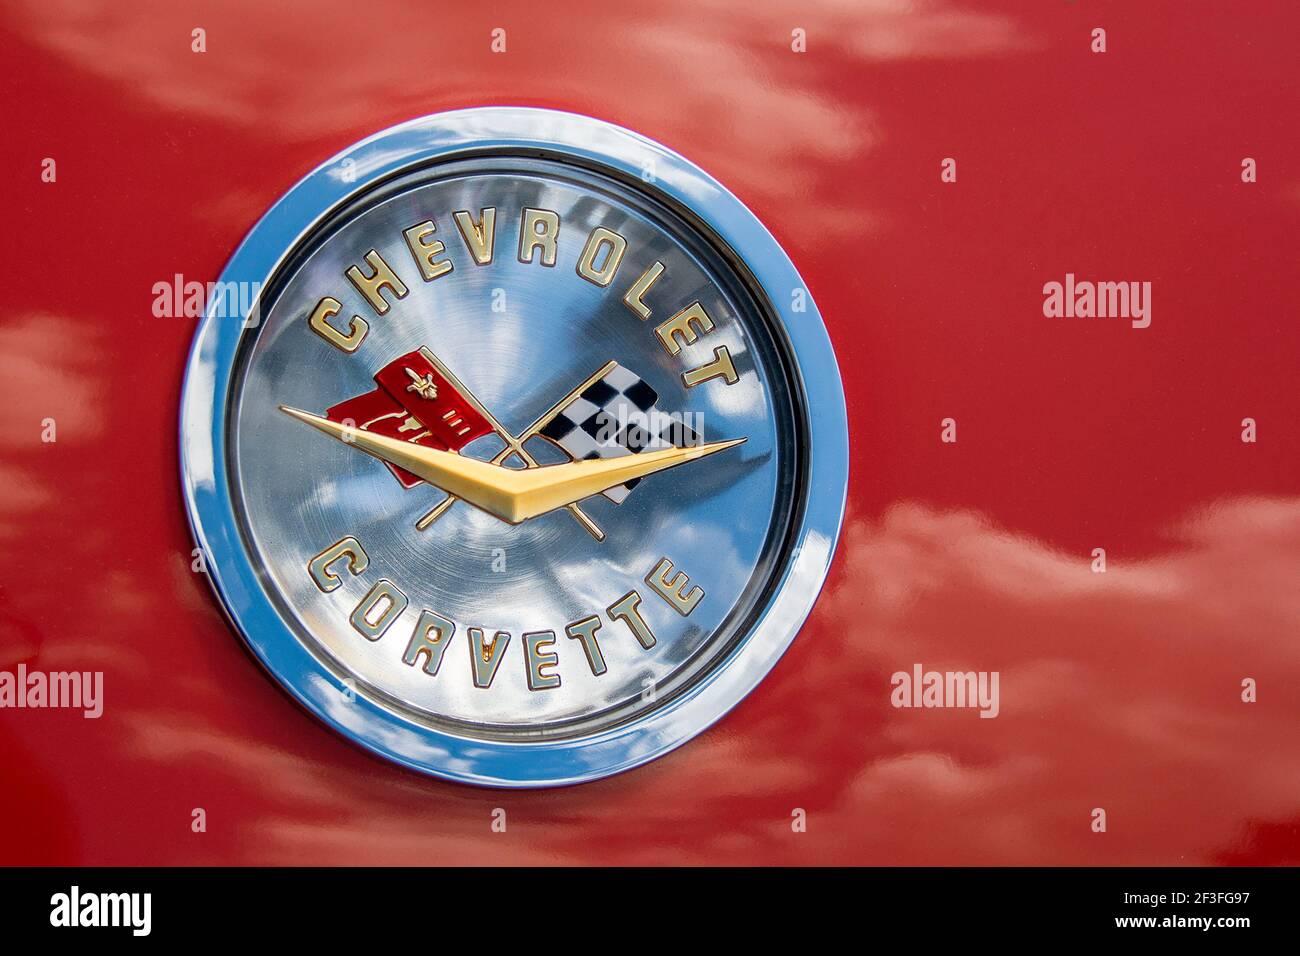 Chevrolet Corvette Hood Emblem with cloud reflections on bright red vehicle body. Stock Photo